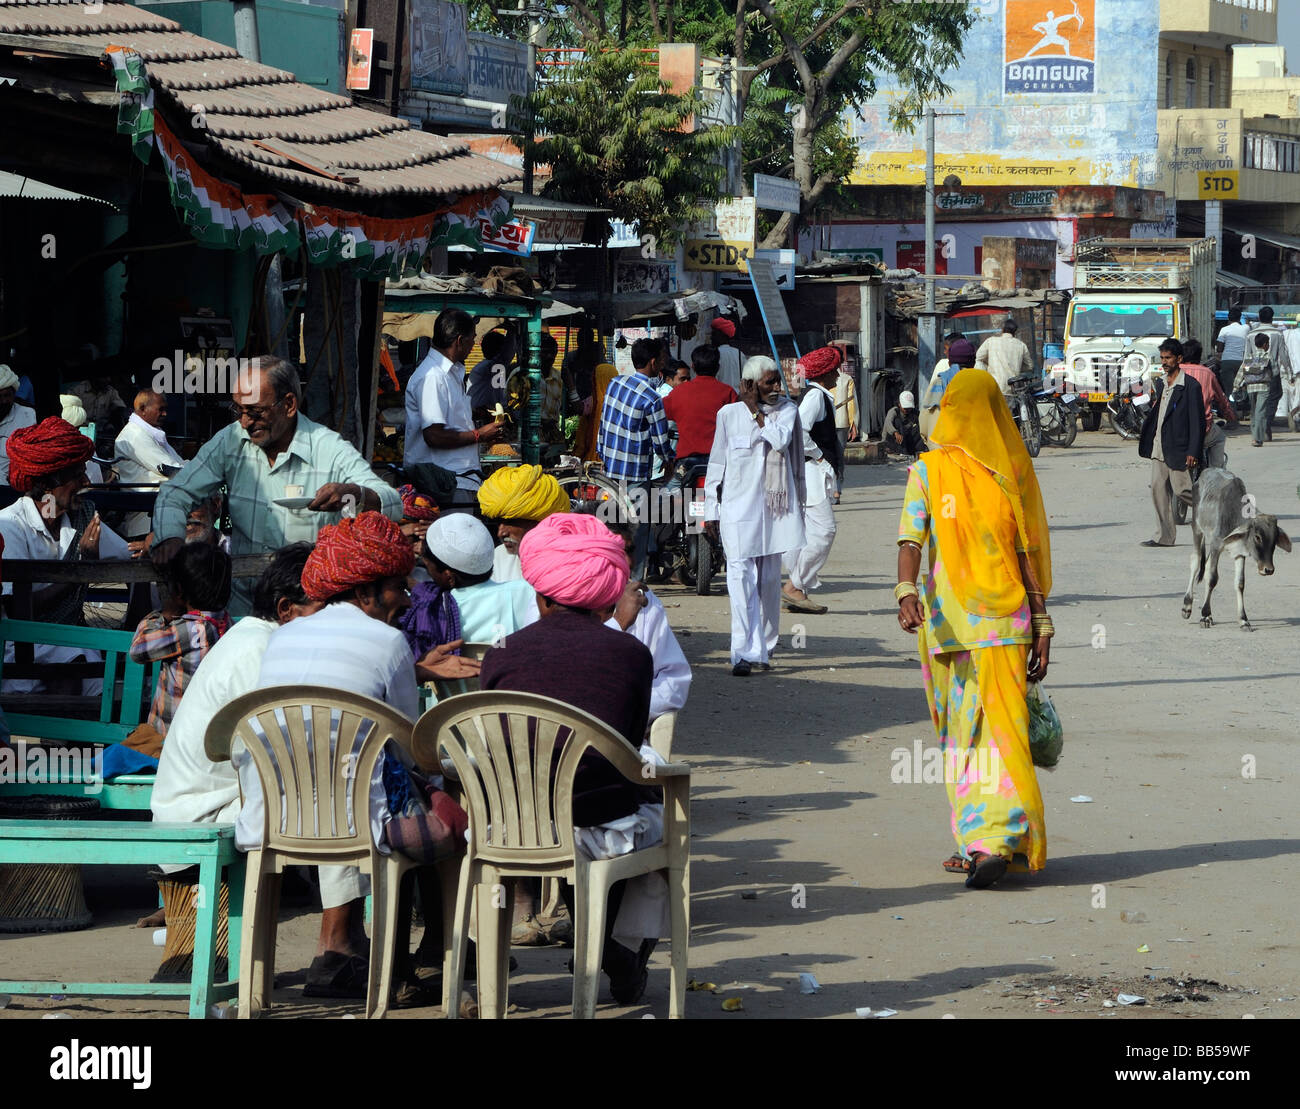 A street secene in Nimaj, Rajasthan, India. Men in brightly coloured turbans sit outside a cafe. Stock Photo